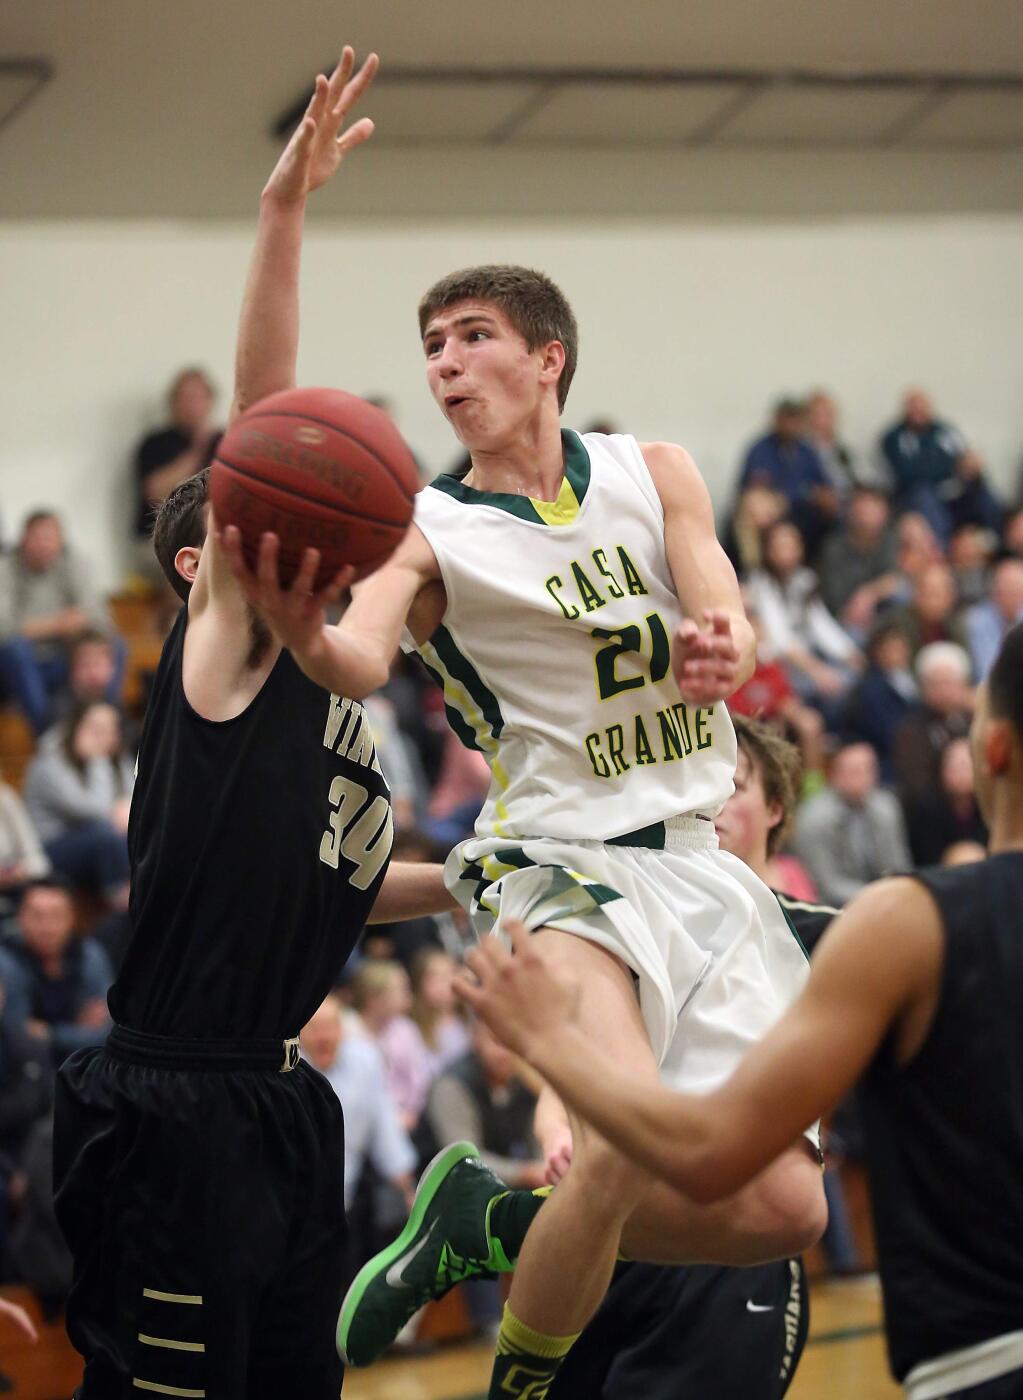 Casa Grande's Robbie Sheldon goes up for two as Windsor's Brent Tucker defends during the game held at Casa Grande High School, Friday, January 16, 2015. (Crista Jeremiason / The Press Democrat)